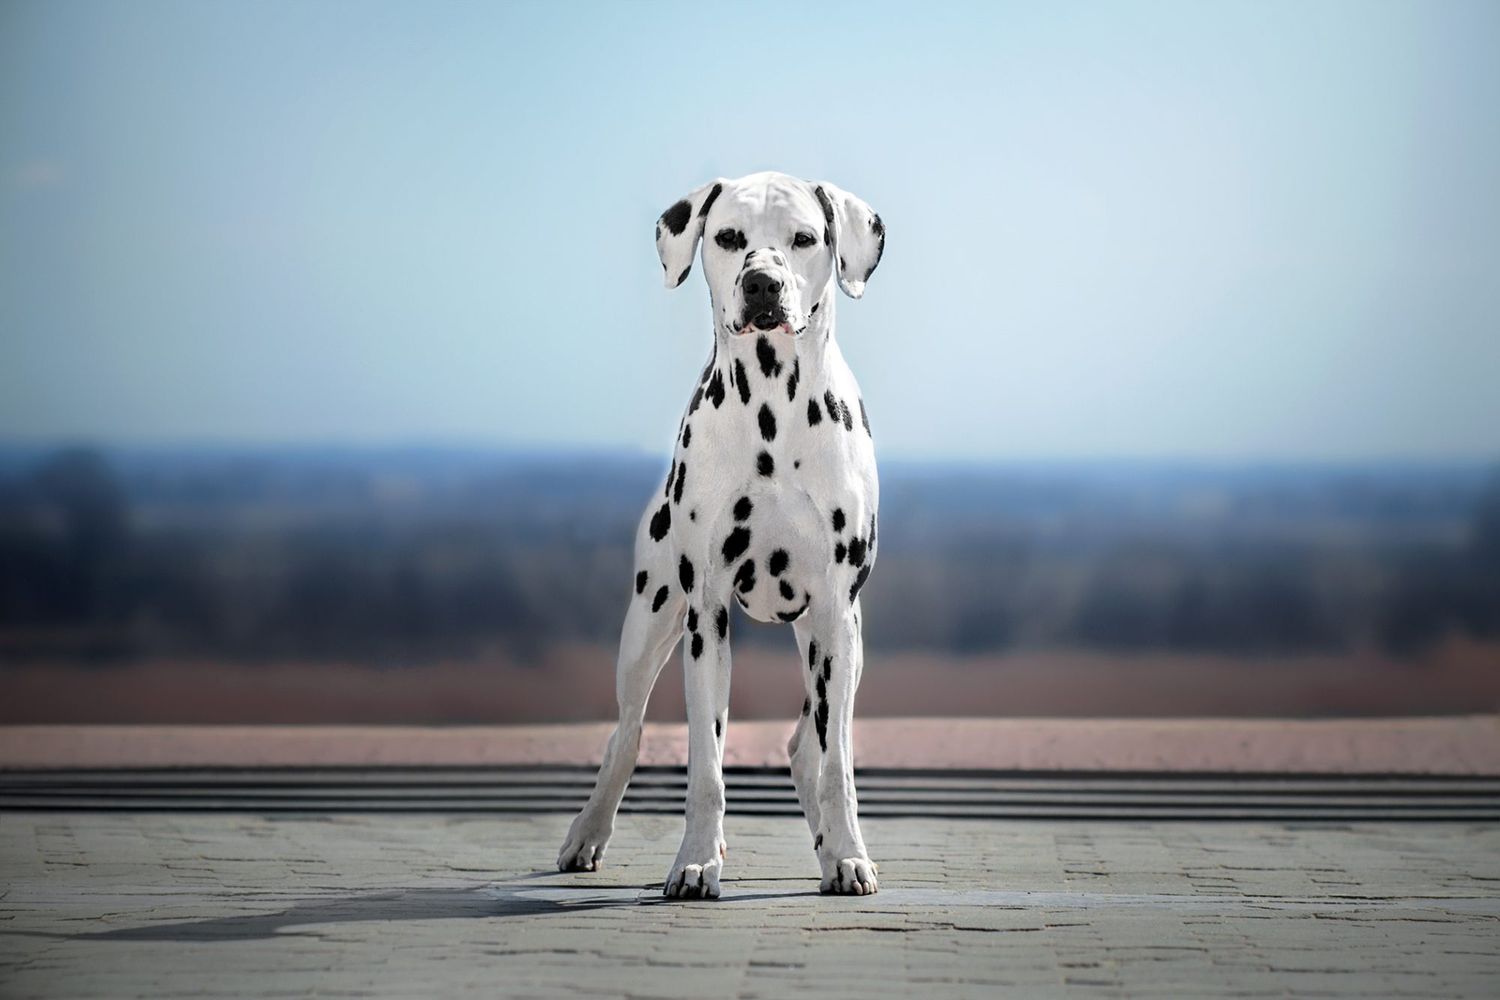 Dalmatian dog in front of blue sky